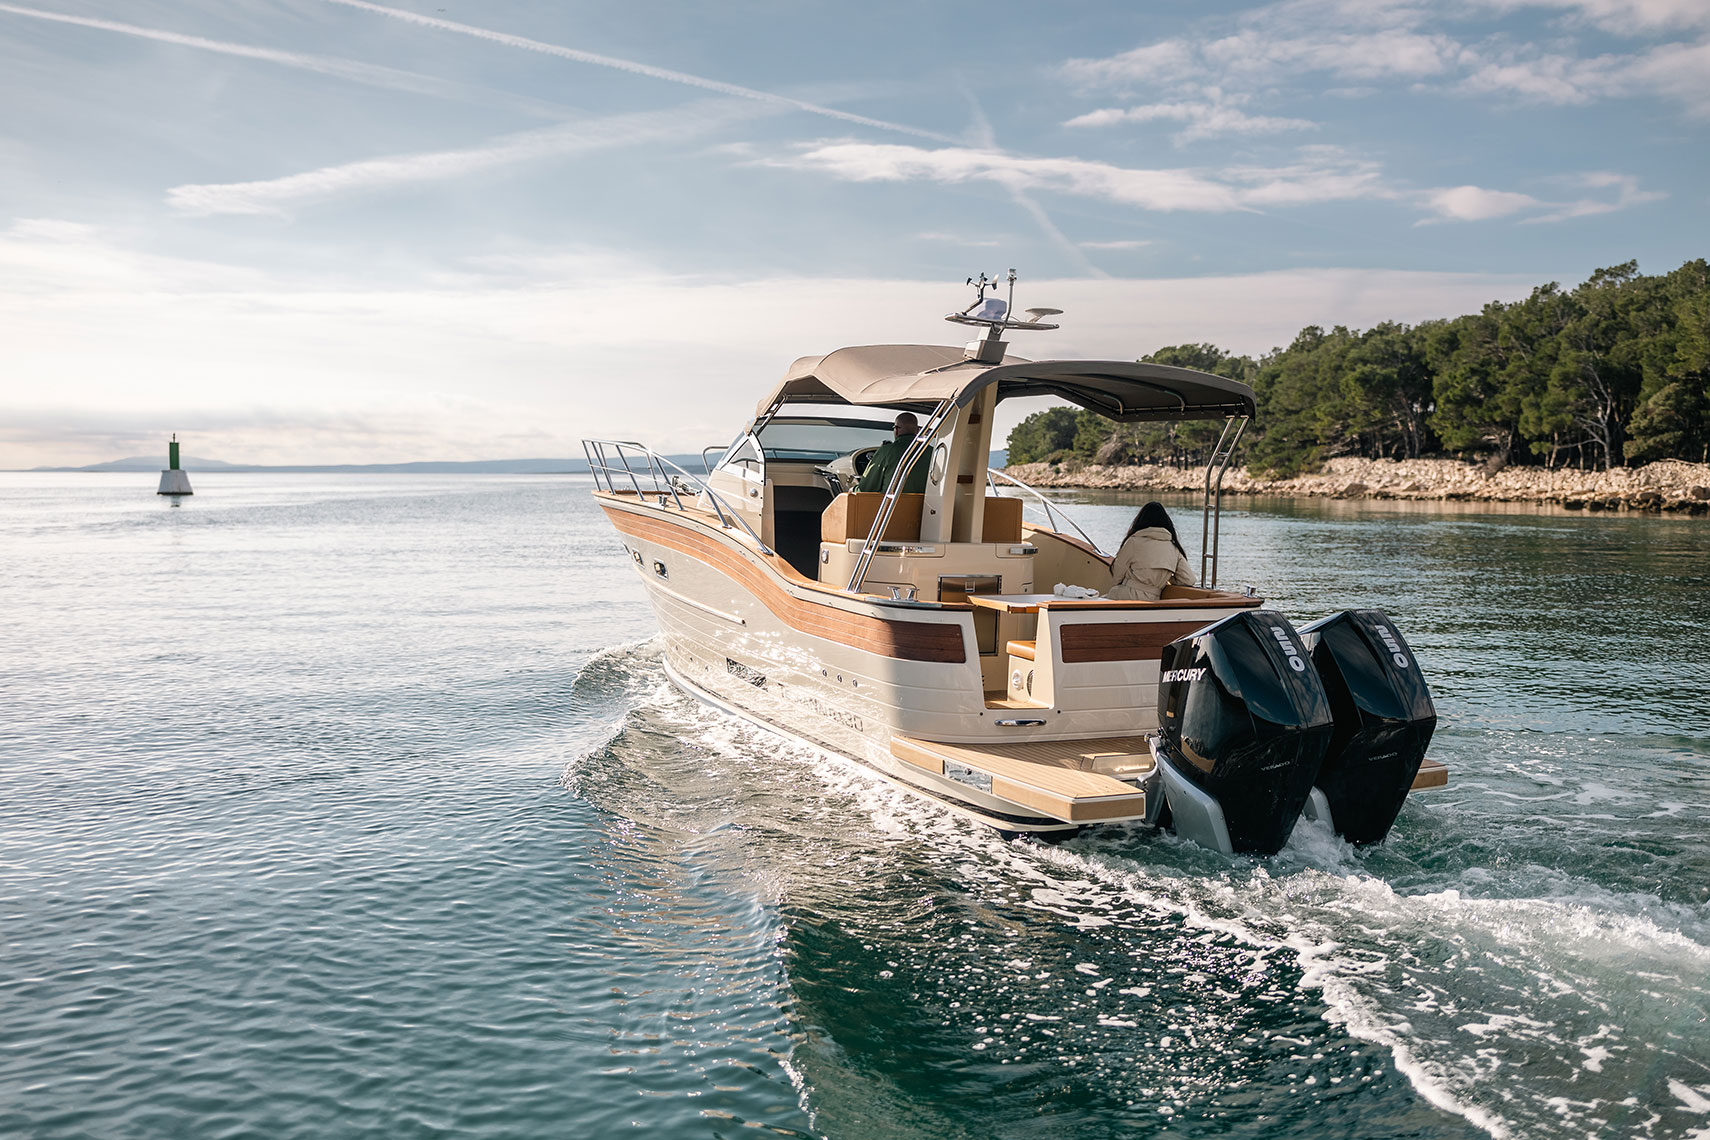 The exterior design retains the recognisable shape of the terra|nauta.